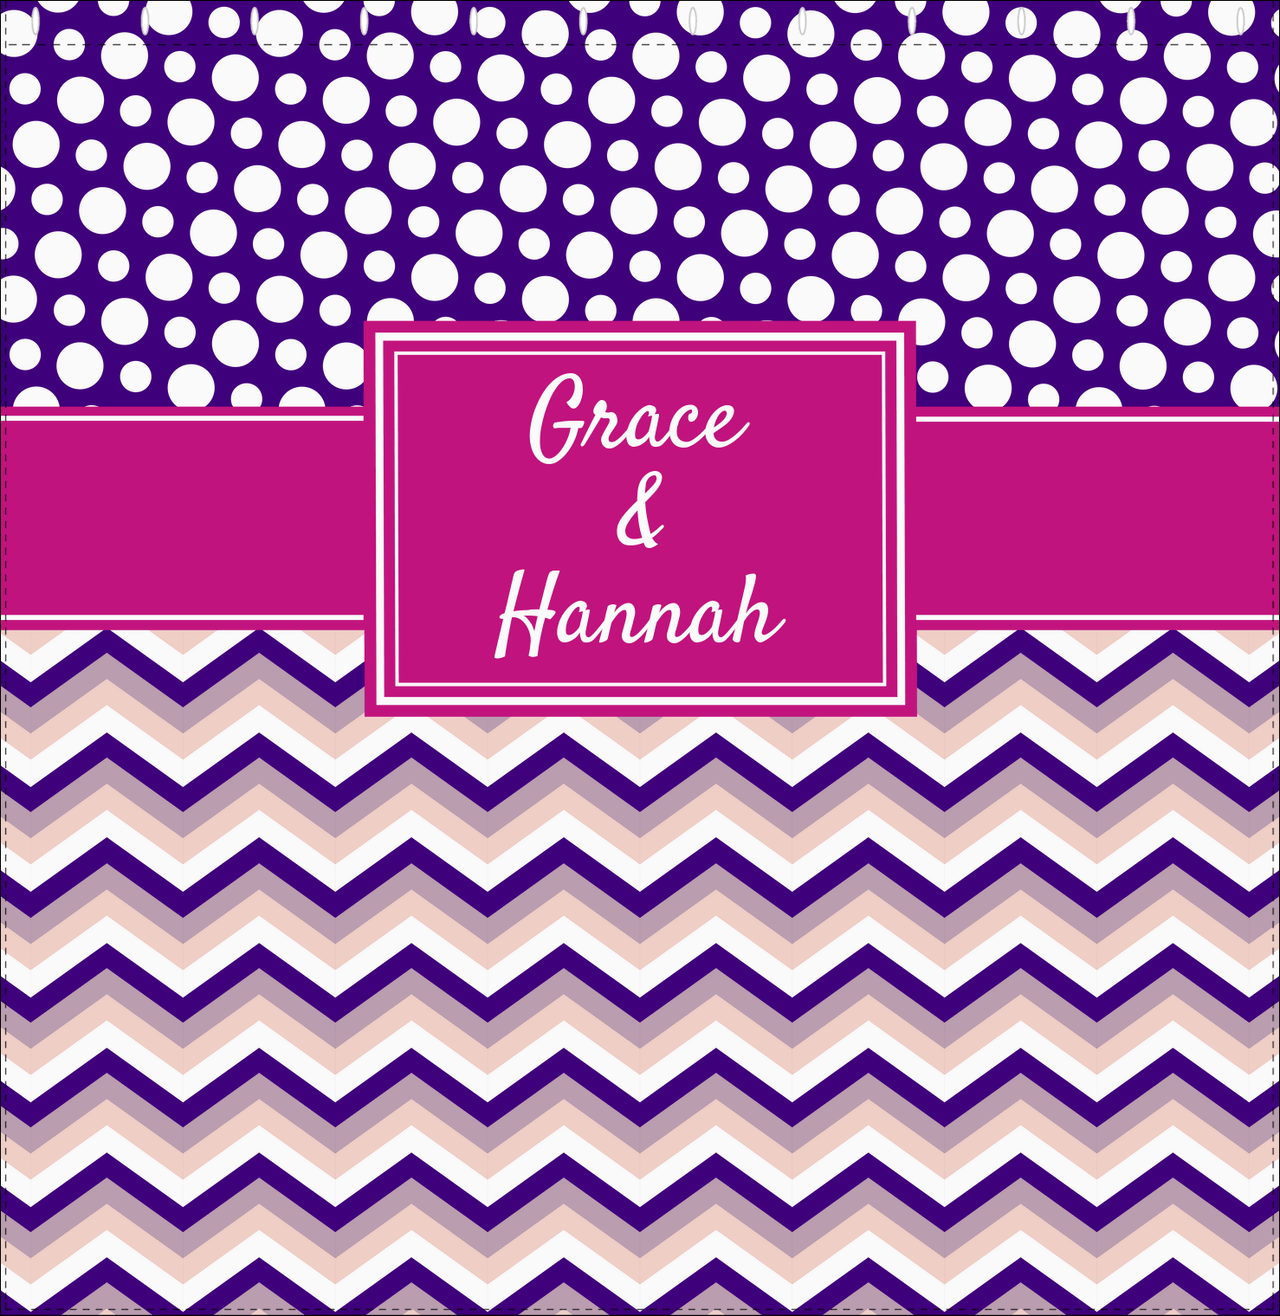 Personalized Polka Dots and Chevron IV Shower Curtain - Pink and Purple - Rectangle Nameplate - Decorate View